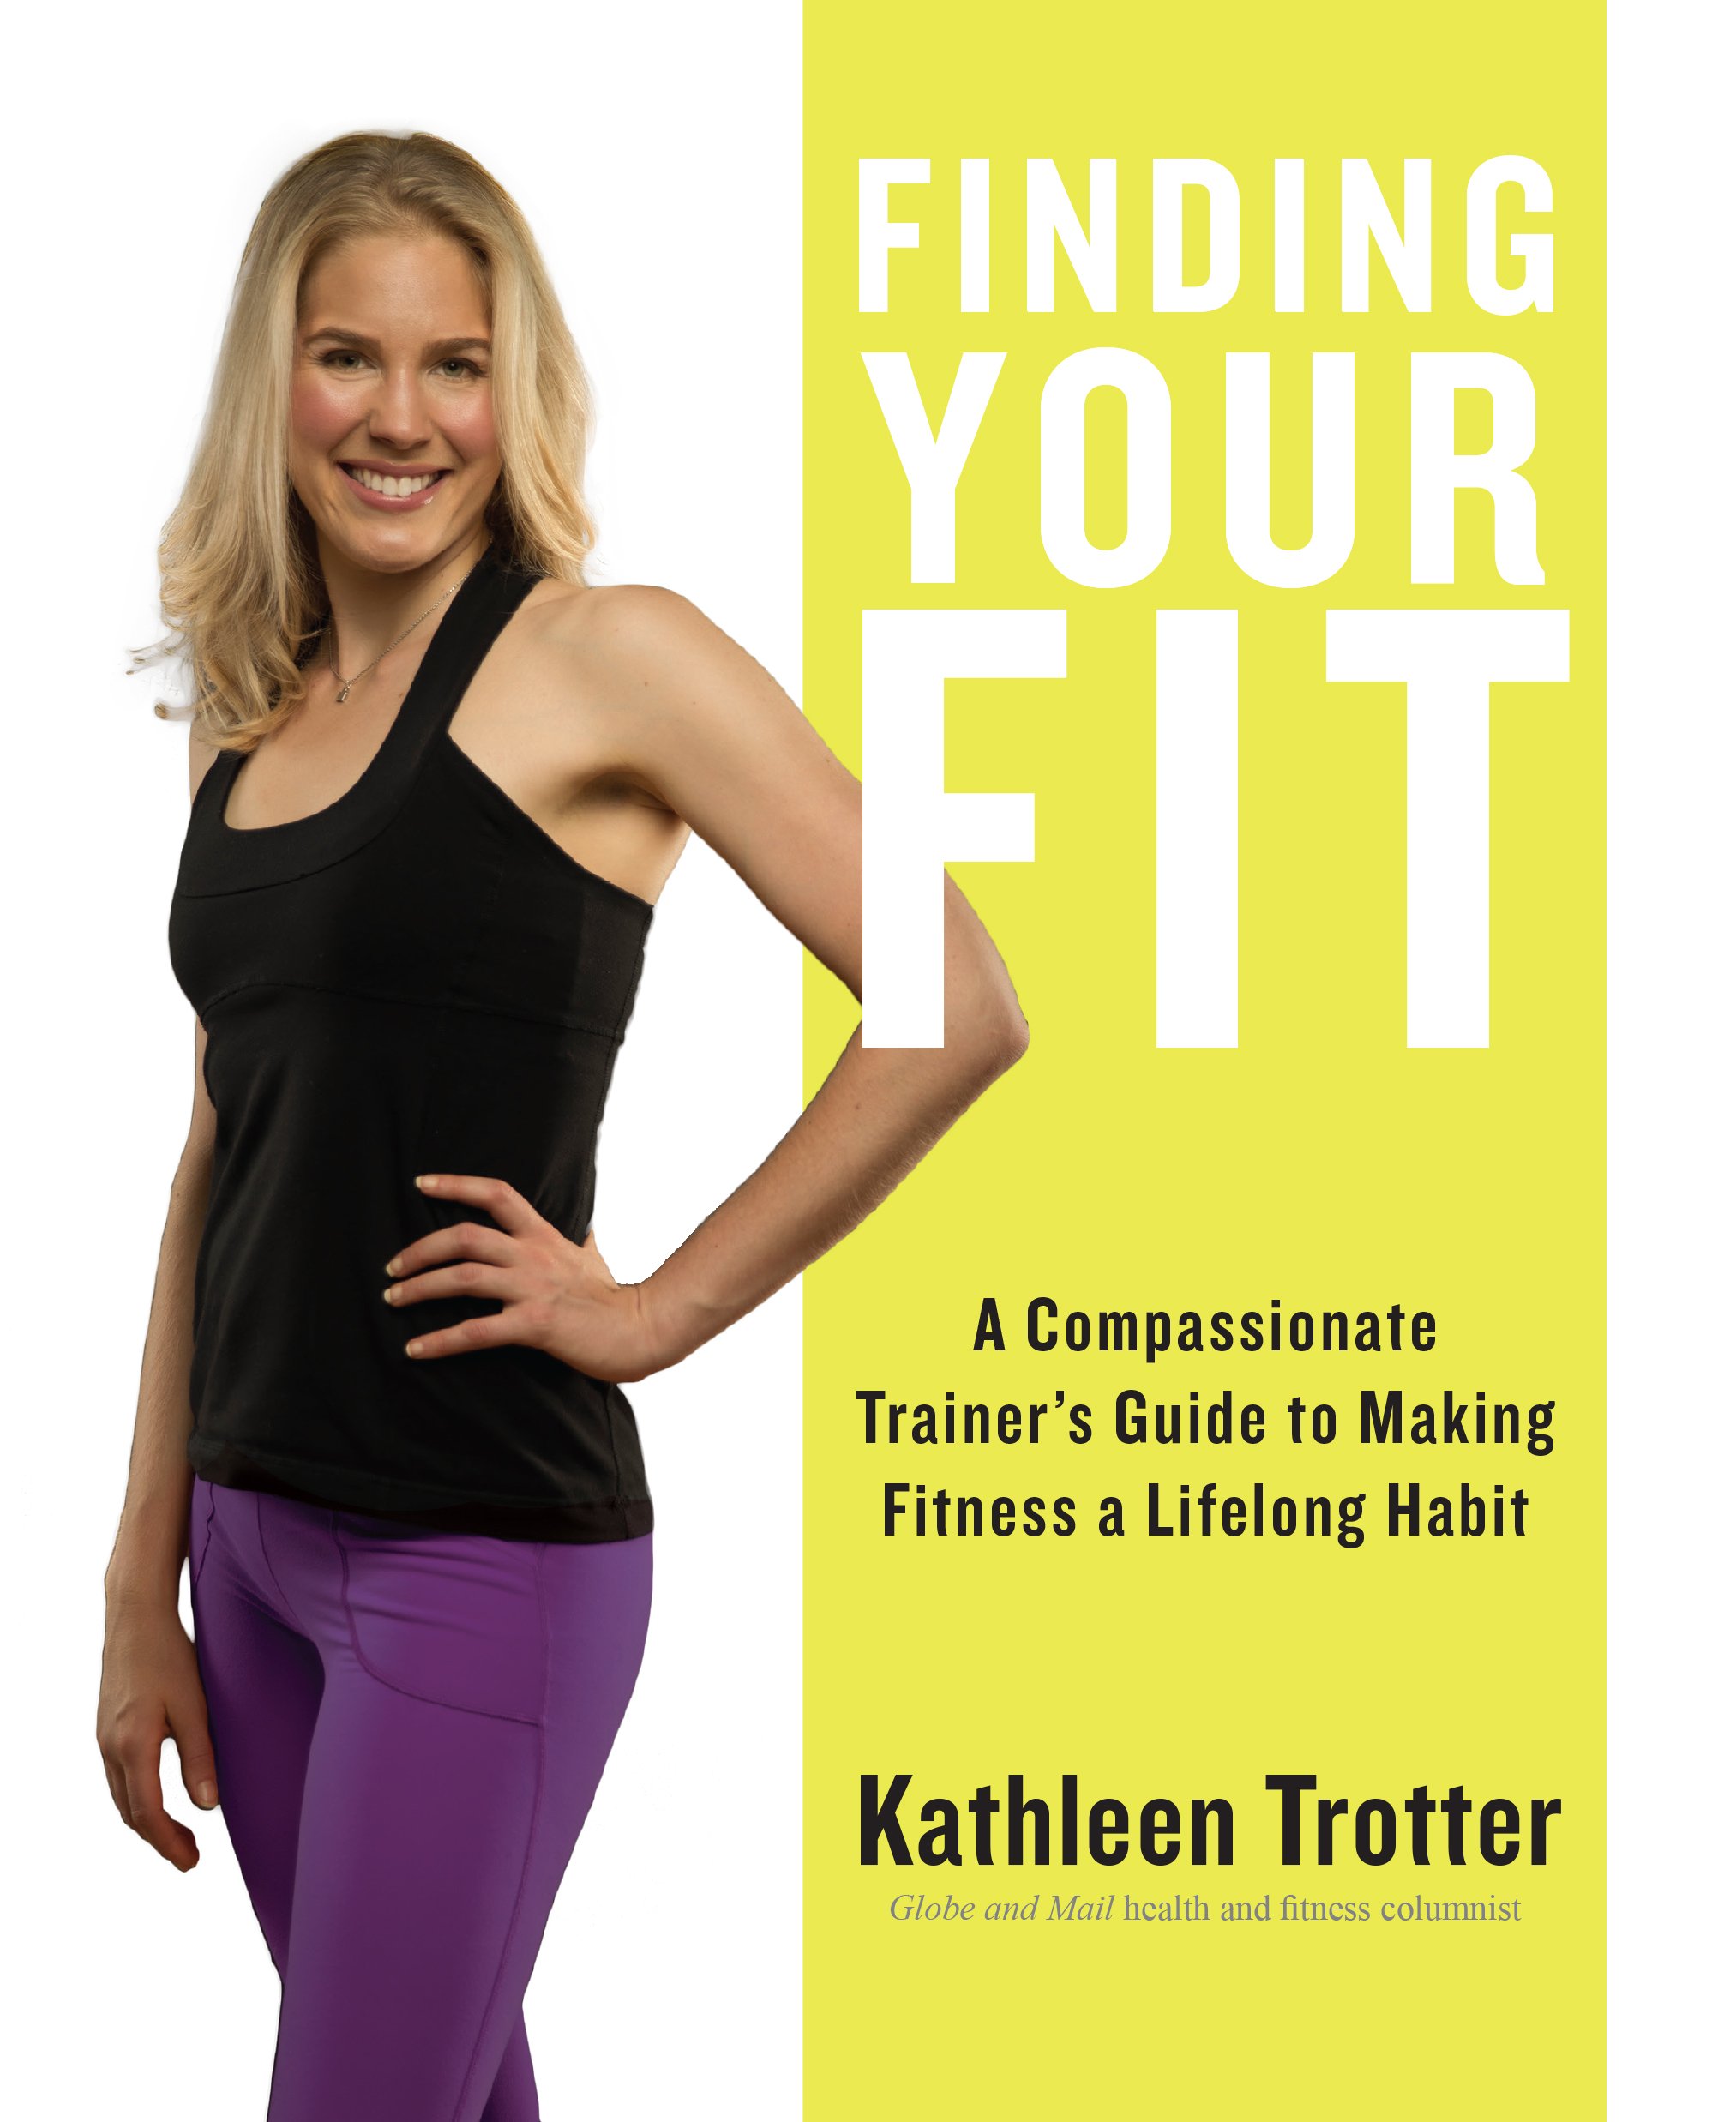 Rachel Steele Mother Teaches Life Leason - Finding Your Fit: A Compassionate Trainer's Guide to Making Fitness a  Lifelong Habit - Kathleen Trotterâ€“Personal trainer, author, speaker